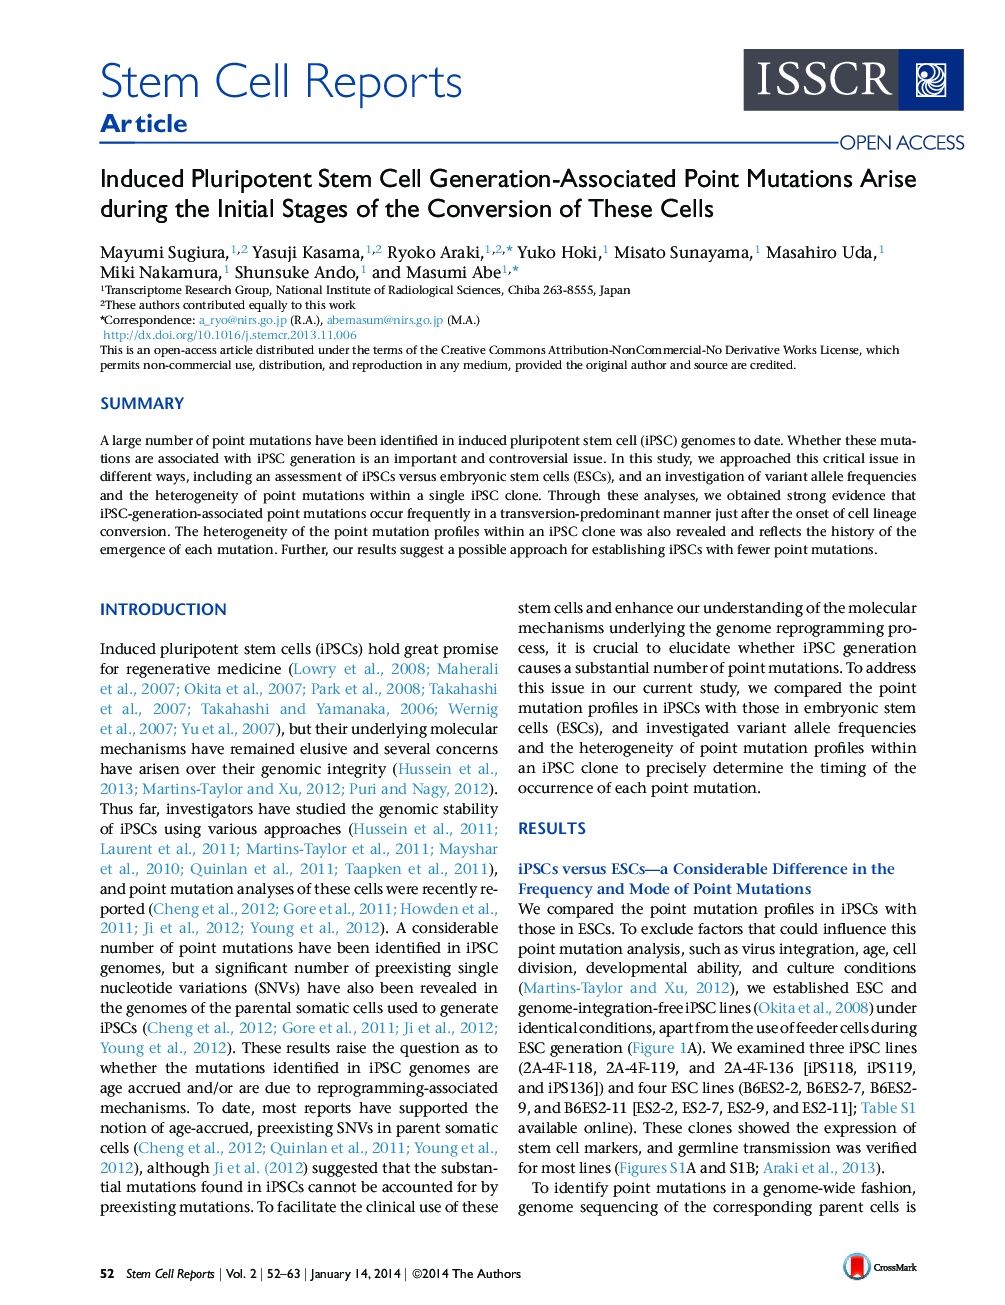 Induced Pluripotent Stem Cell Generation-Associated Point Mutations Arise during the Initial Stages of the Conversion of These Cells 